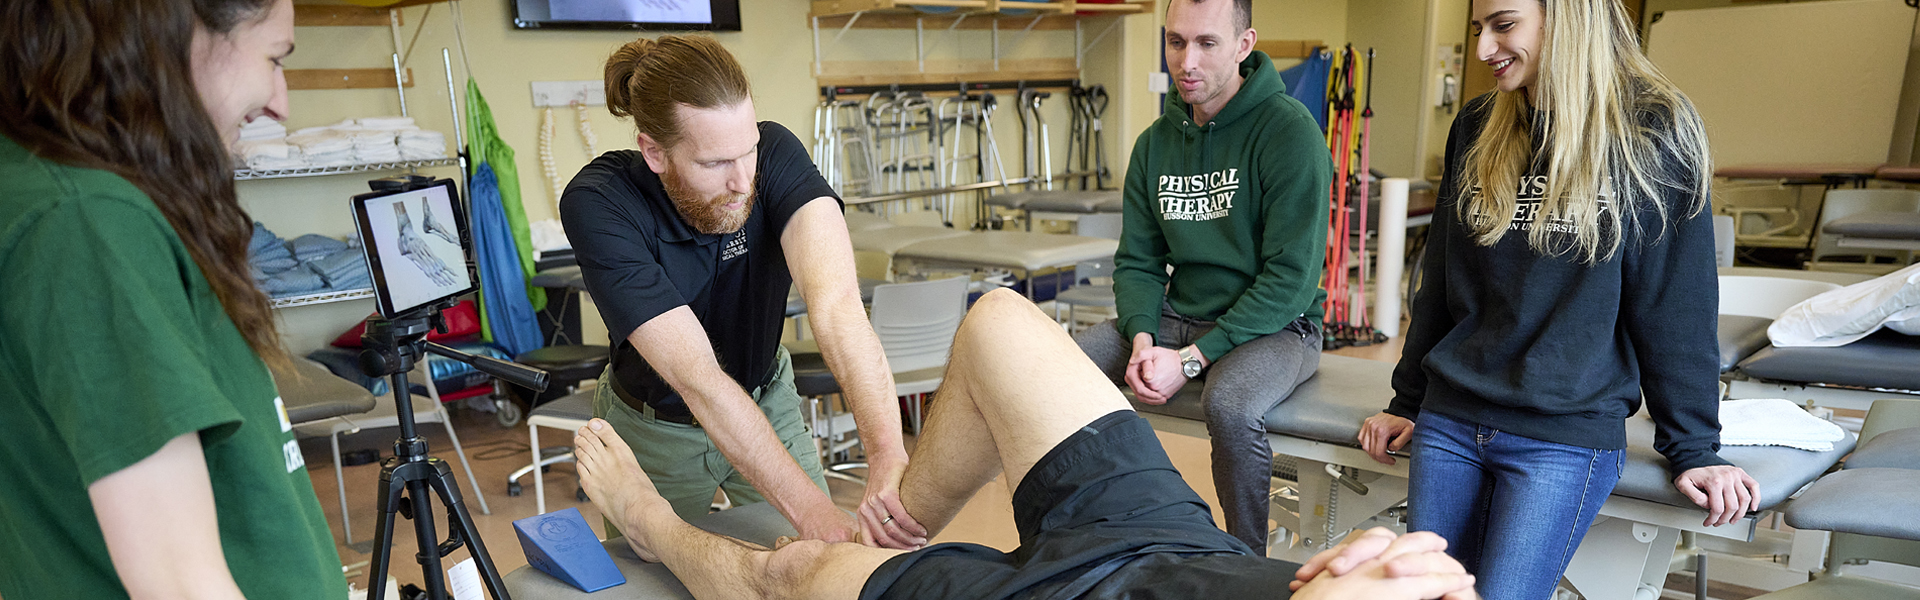 Physical Therapy students and faculty work in a classroom